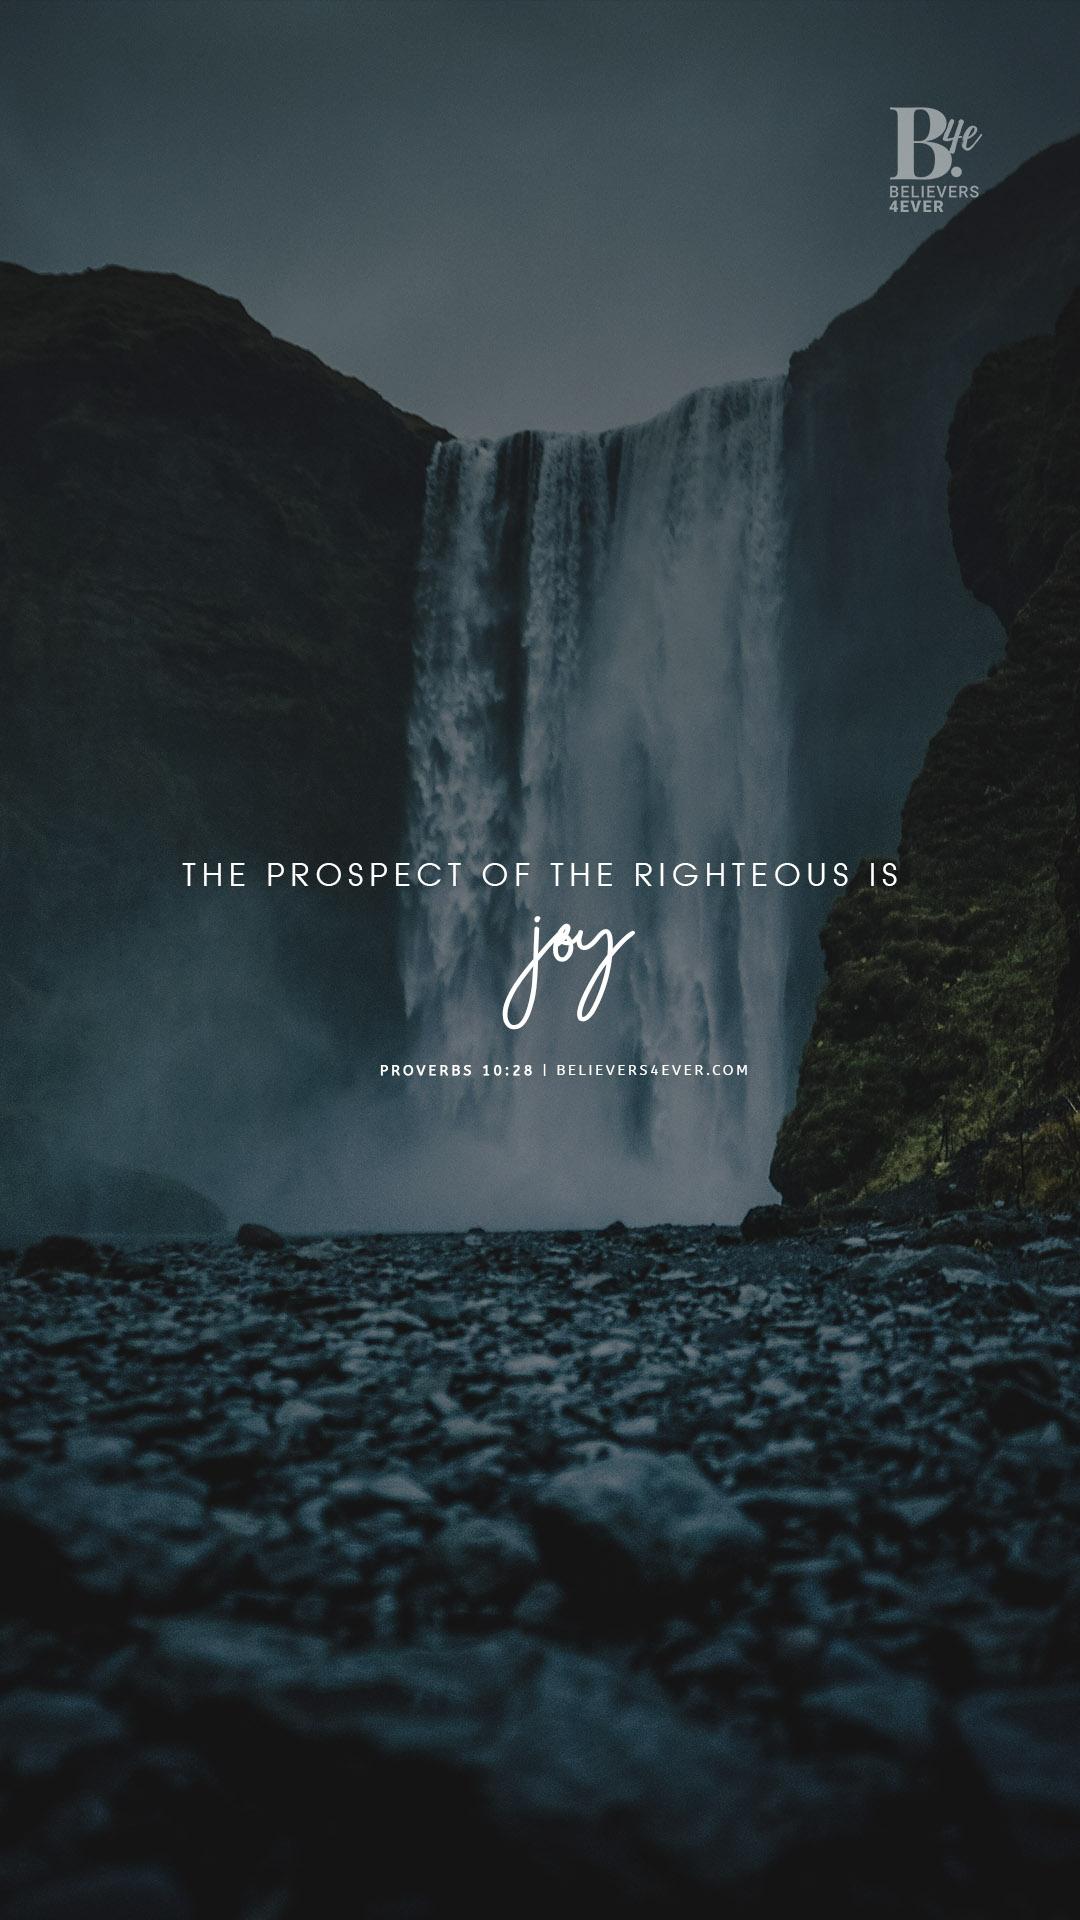 The prospect of the righteous